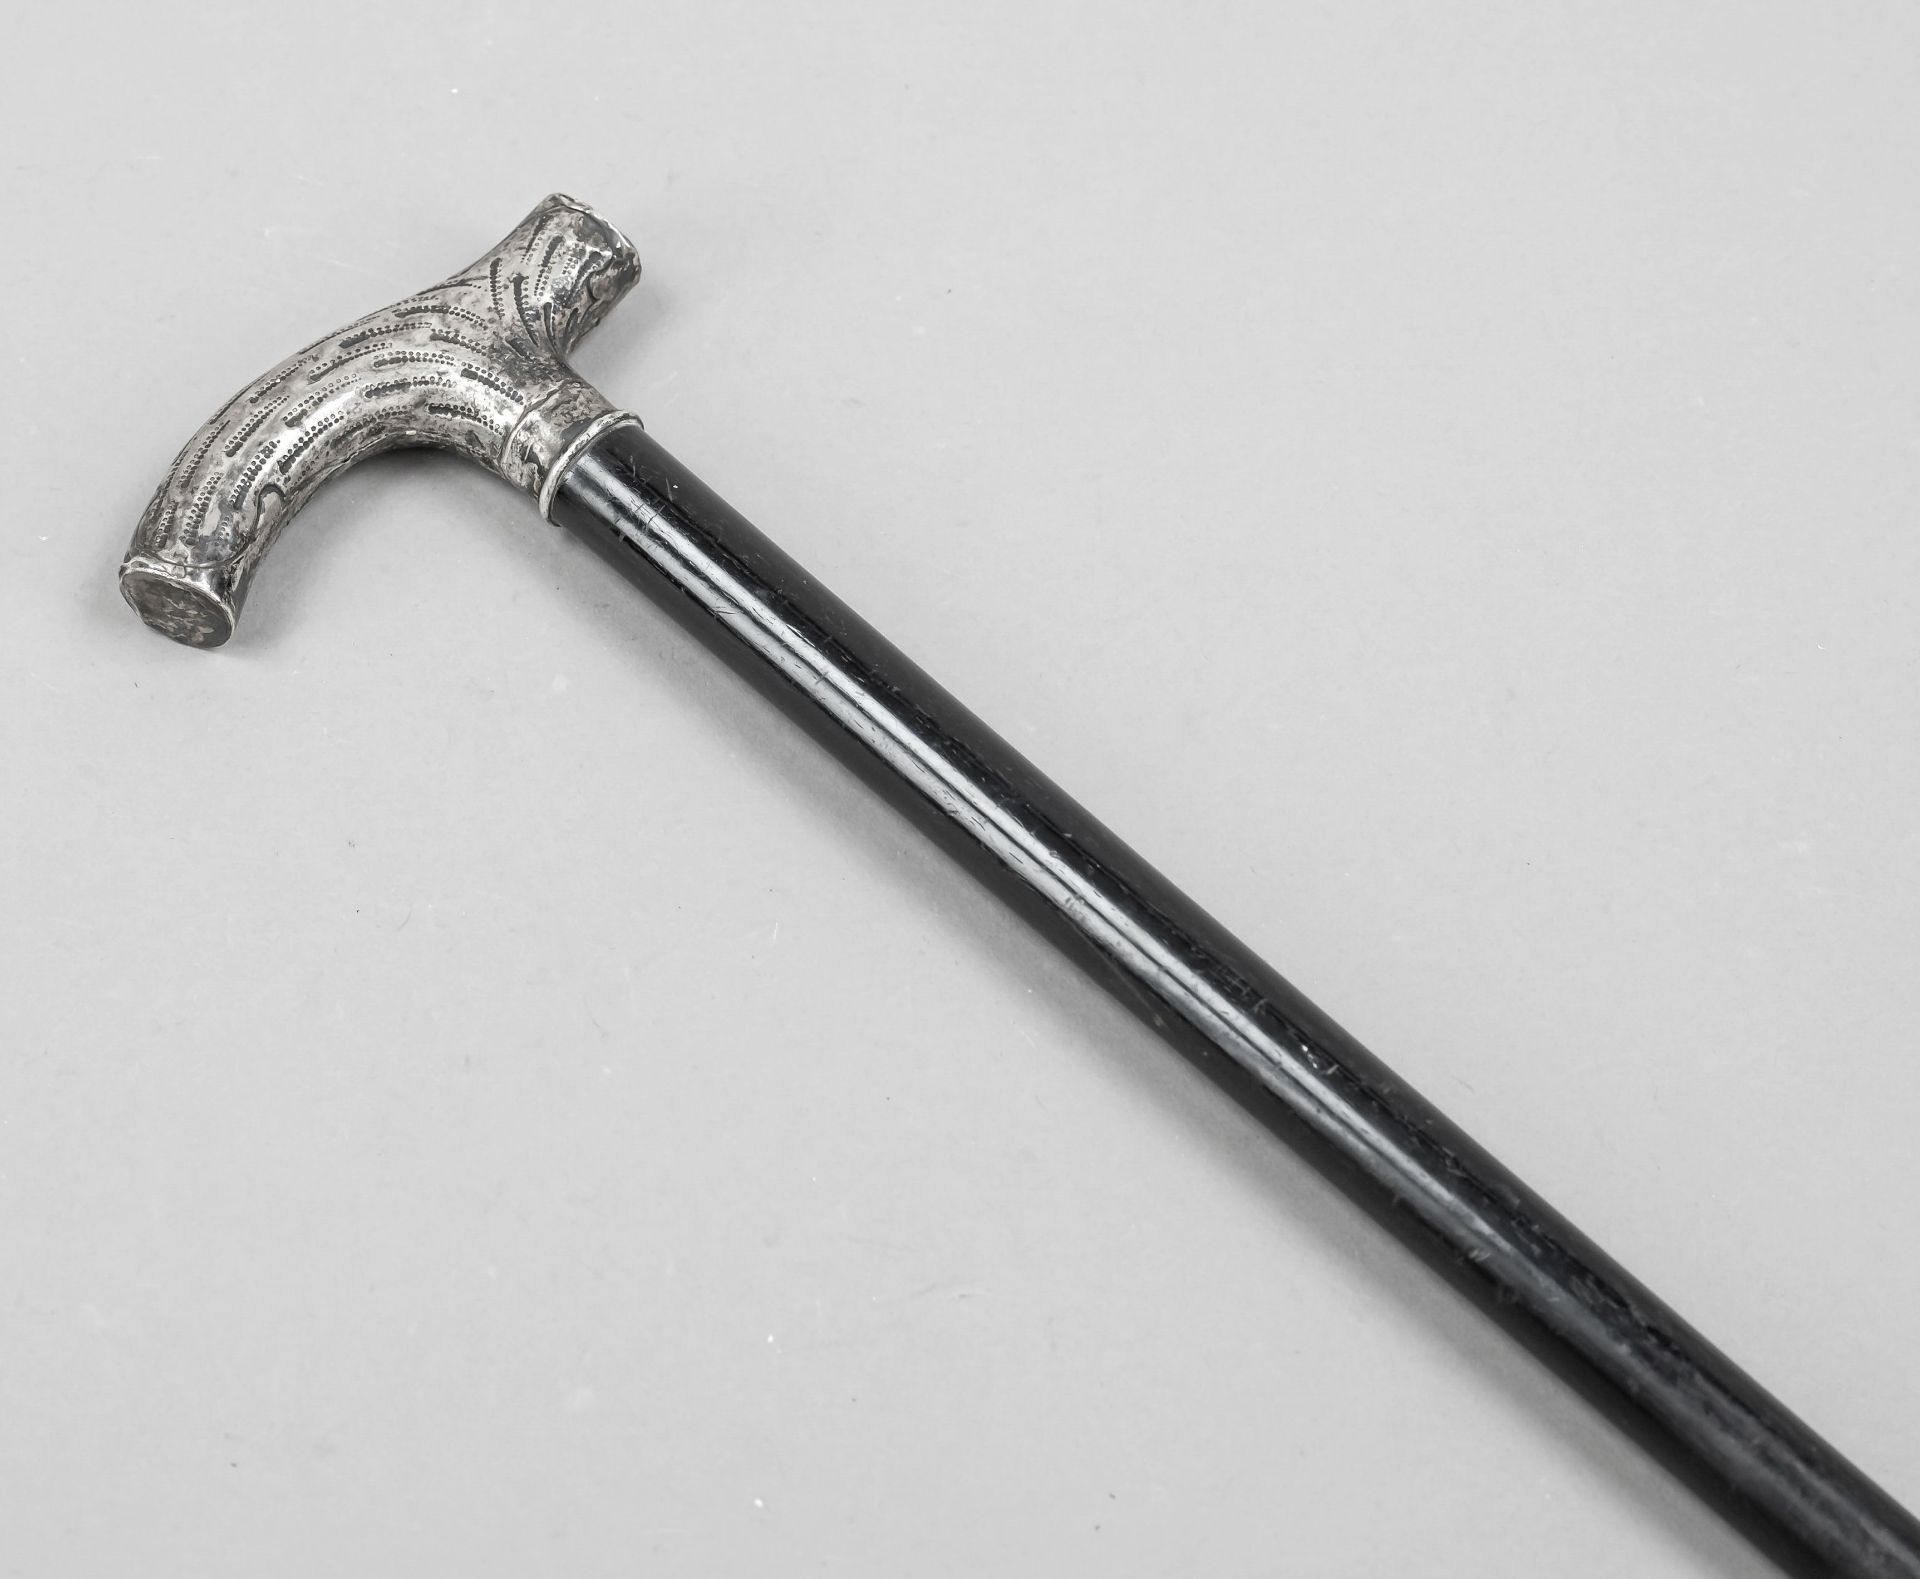 Walking stick with silver handle, probably German, 20th century, silver 800/000, with engraved